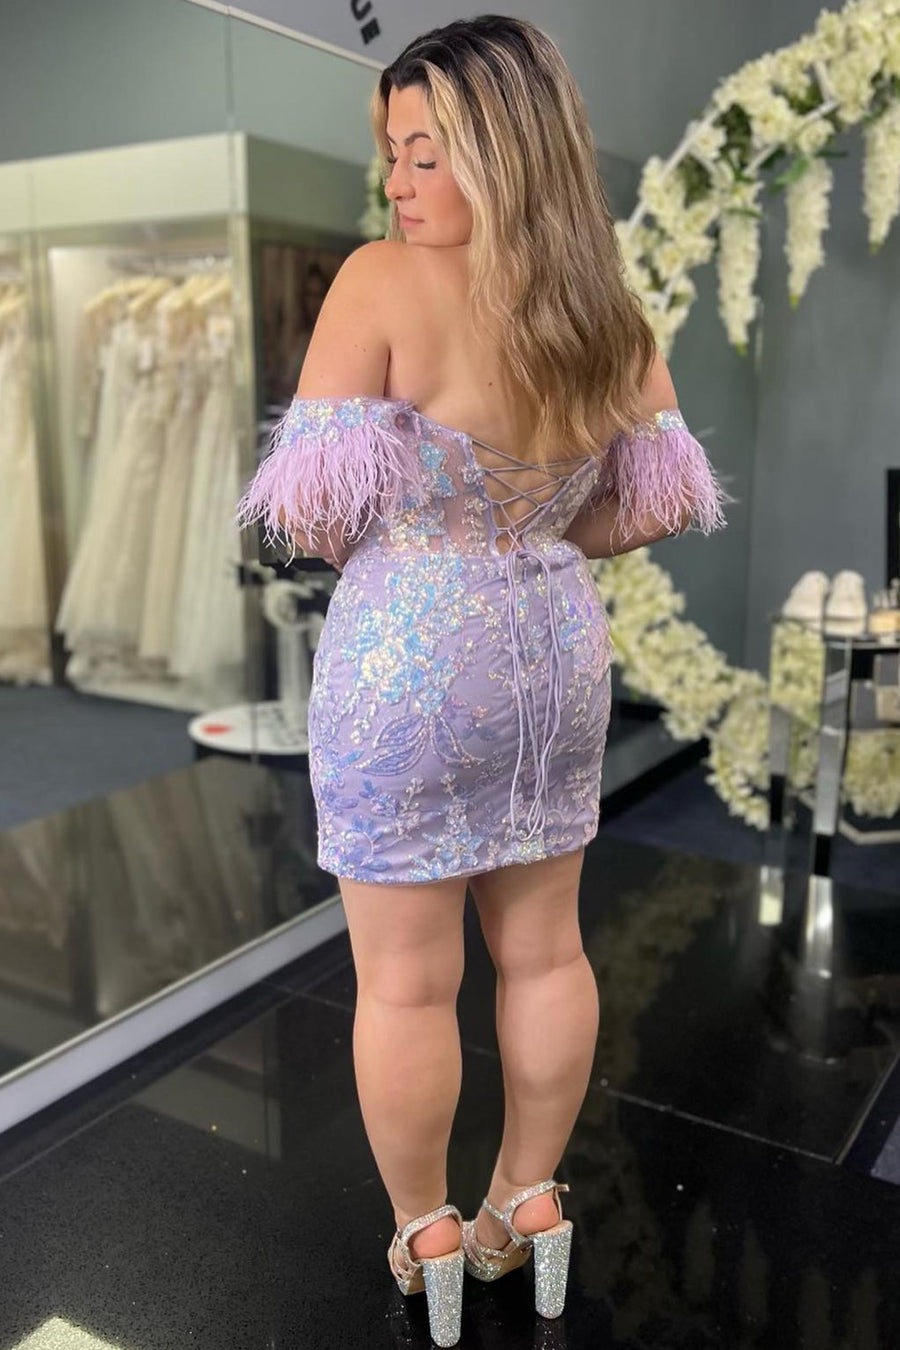 Purple Off-the-Shoulder Bodycon Cocktail Dress with Sequin Appliques